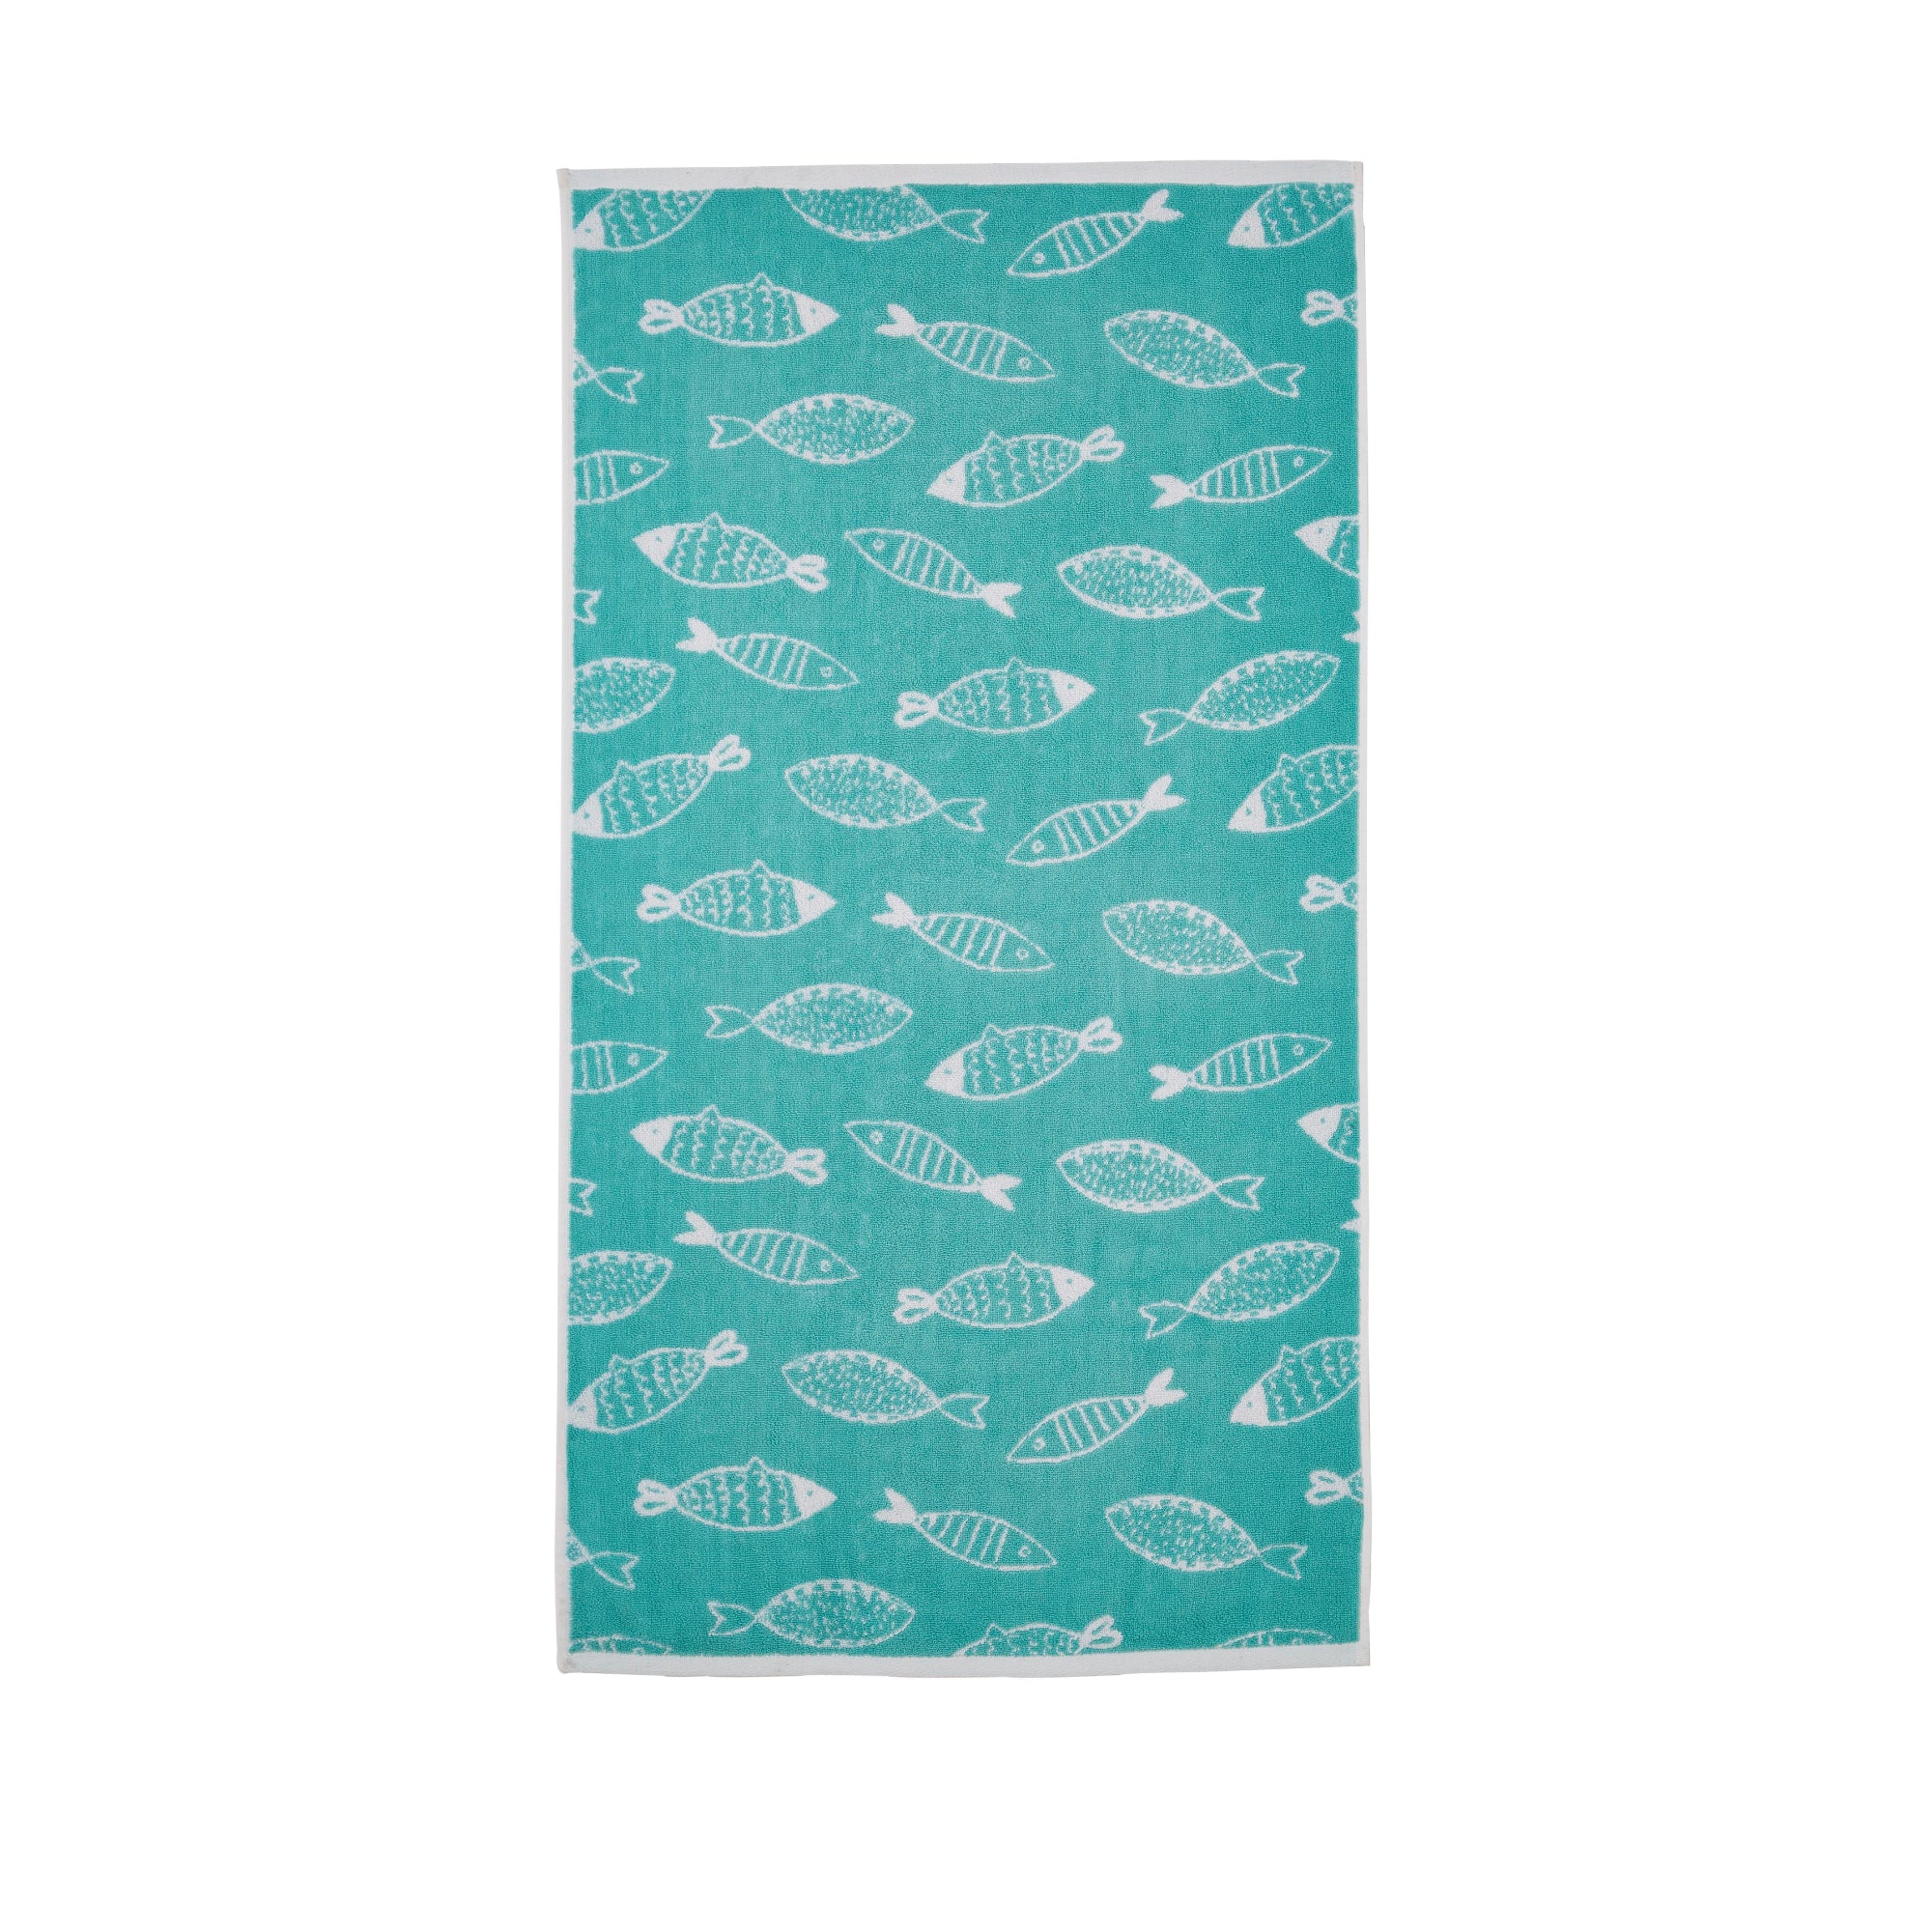 Hand Towel (2 pack) Fish by Fusion in Aqua/White